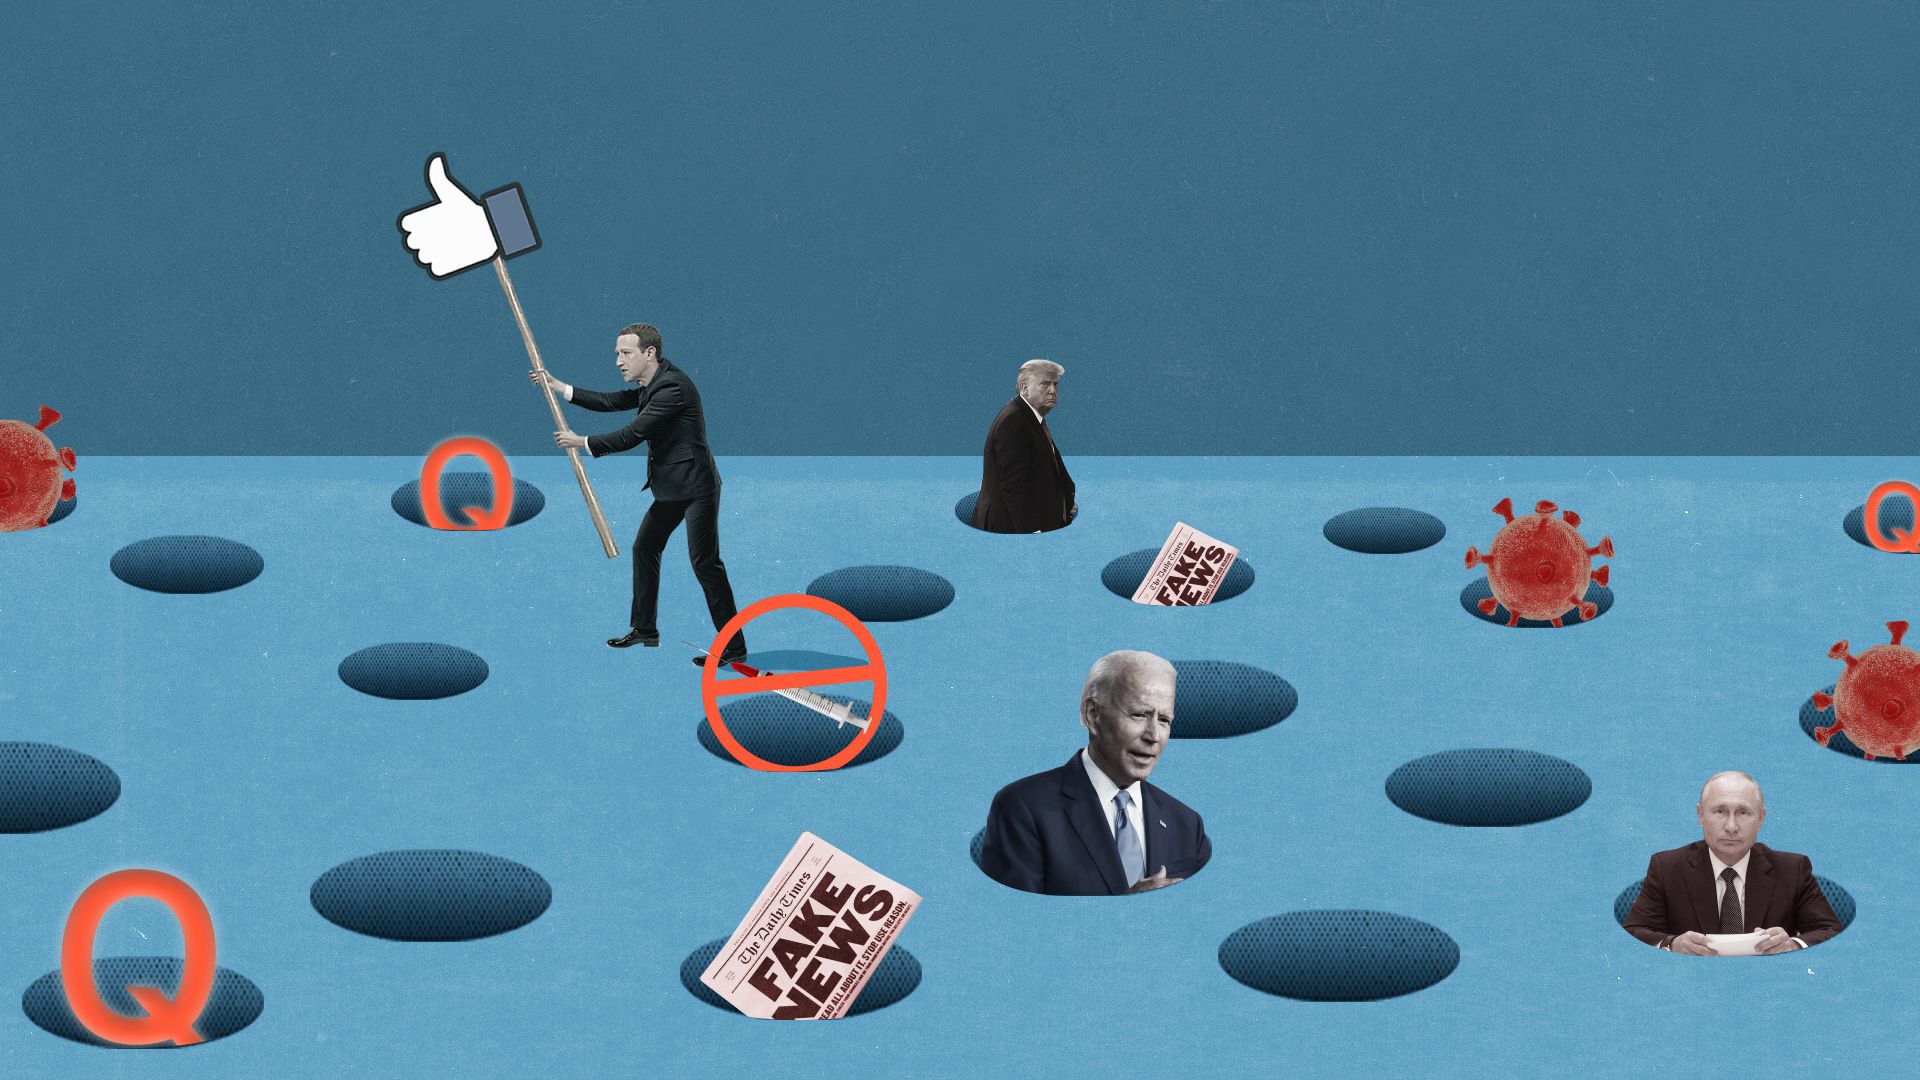 An illustration of Facebook CEO Mark Zuckerberg with icons coming out of holes for Qanon, fake news and Vladimir Putin